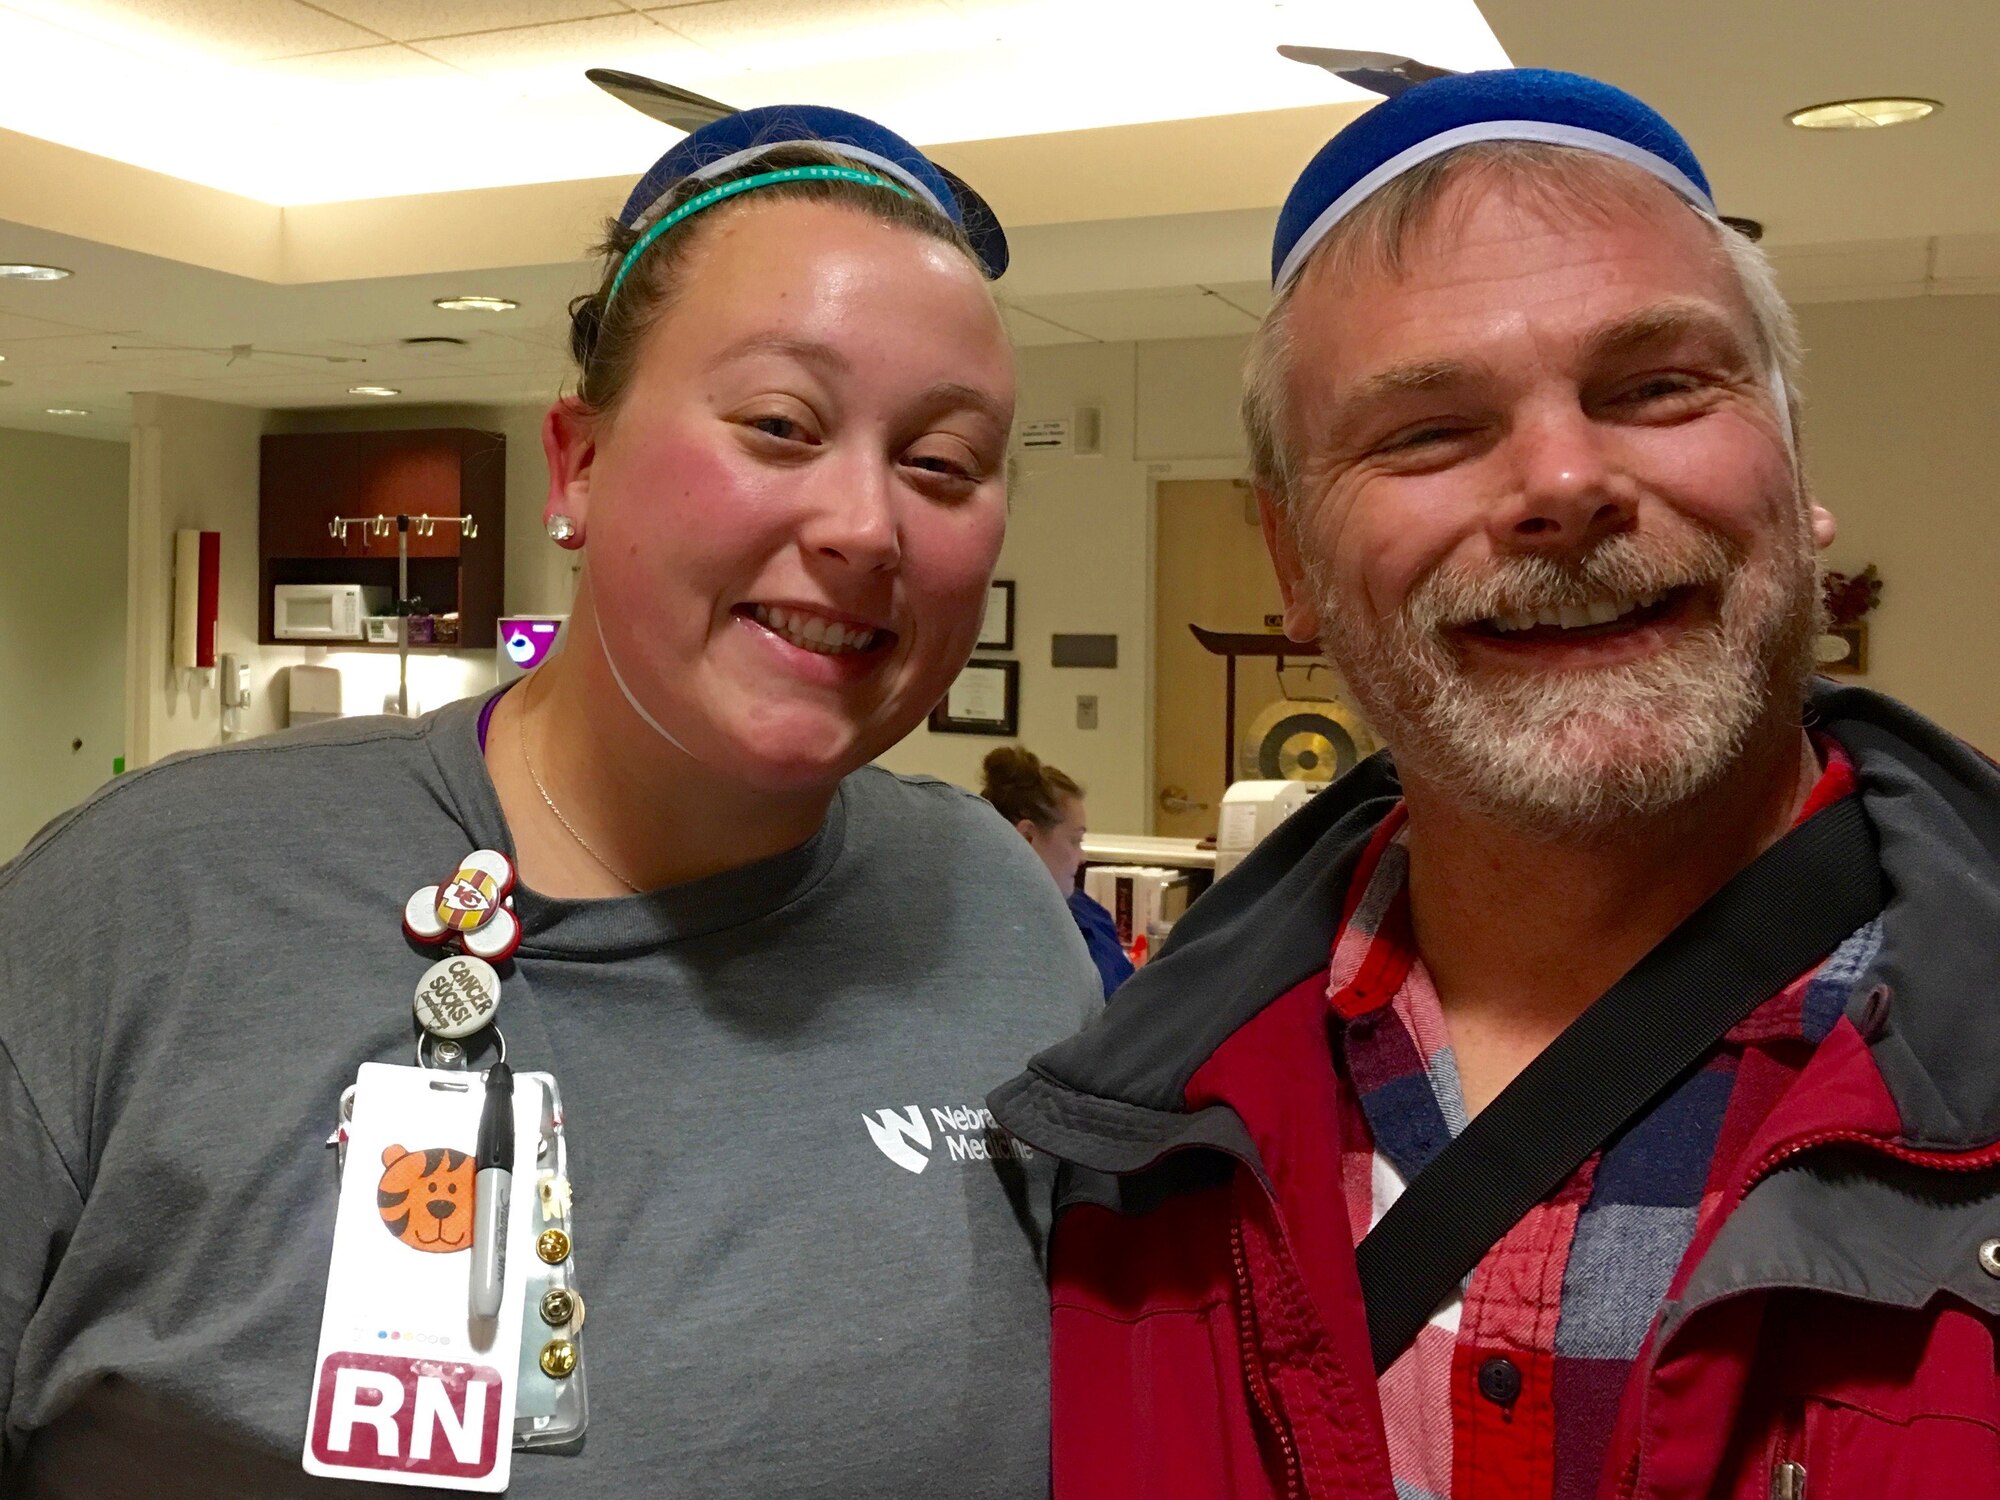 Ken Bauer, 55th Wing Plans, Program and Requirements office international program officer and senior technical advisor poses in a propeller beanie hat with Hillary Stevenson, Nebraska Medical Center registered nurse during one of his chemotherapy visits in Omaha, Nebraska. Bauer used the idea of wearing costumes to chemotherapy to keep fellow patients and staff in good spirits. (Courtesy Photo)